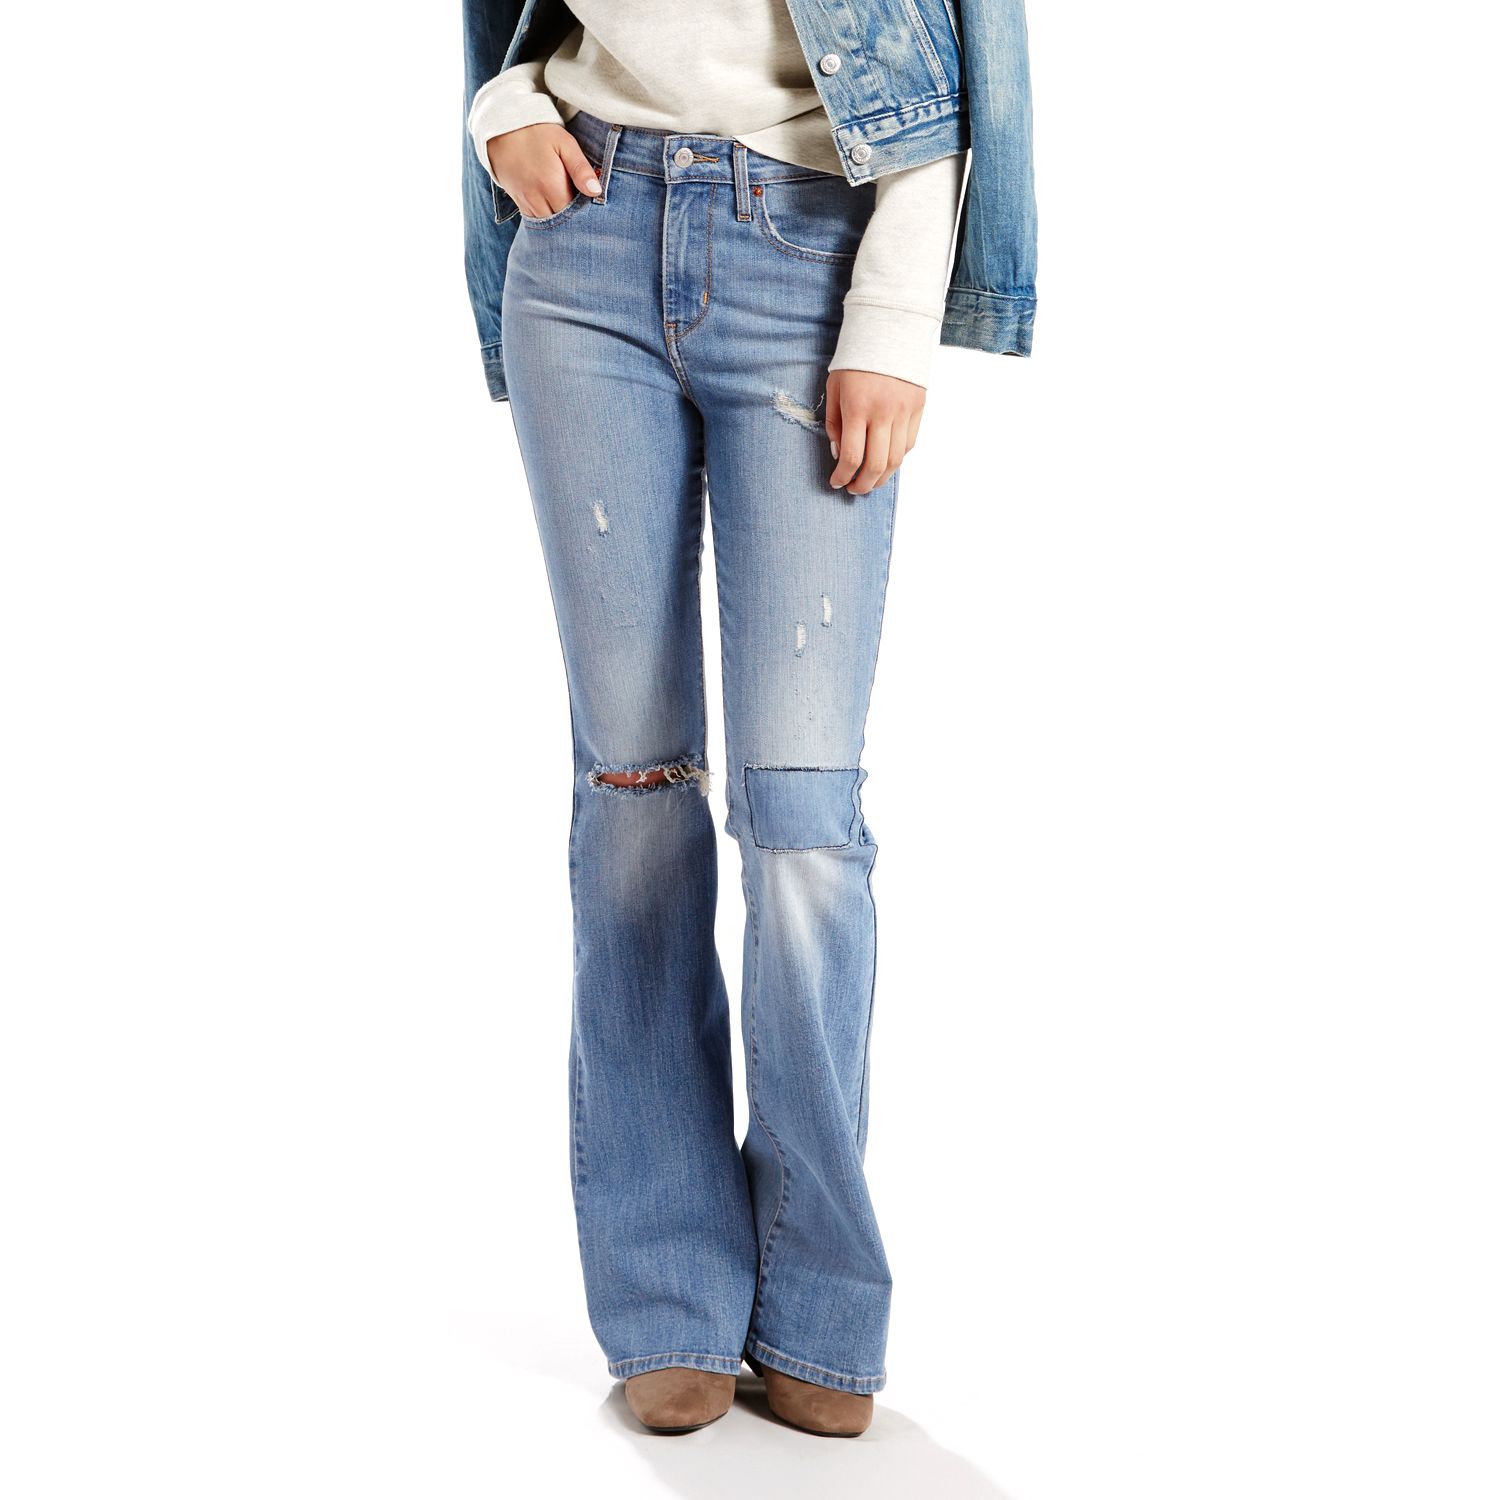 levi's low rise flare jeans